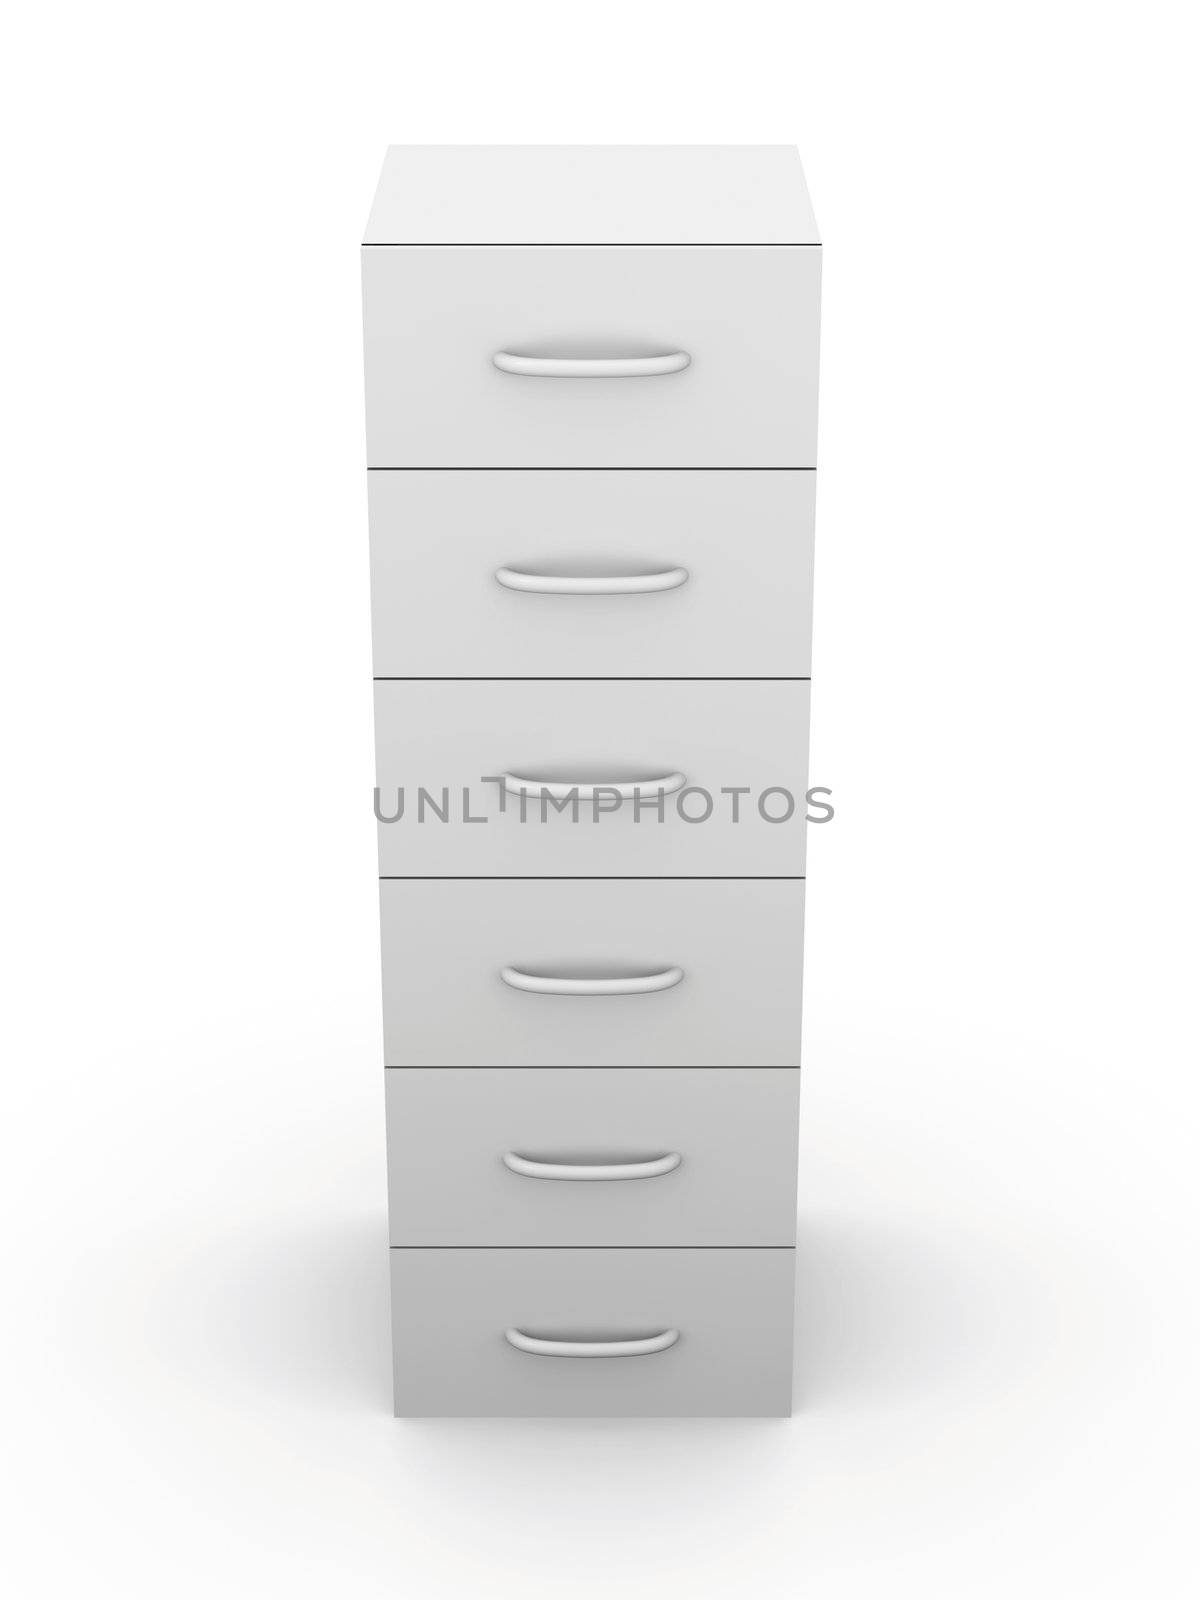 Filing Cabinet by Spectral